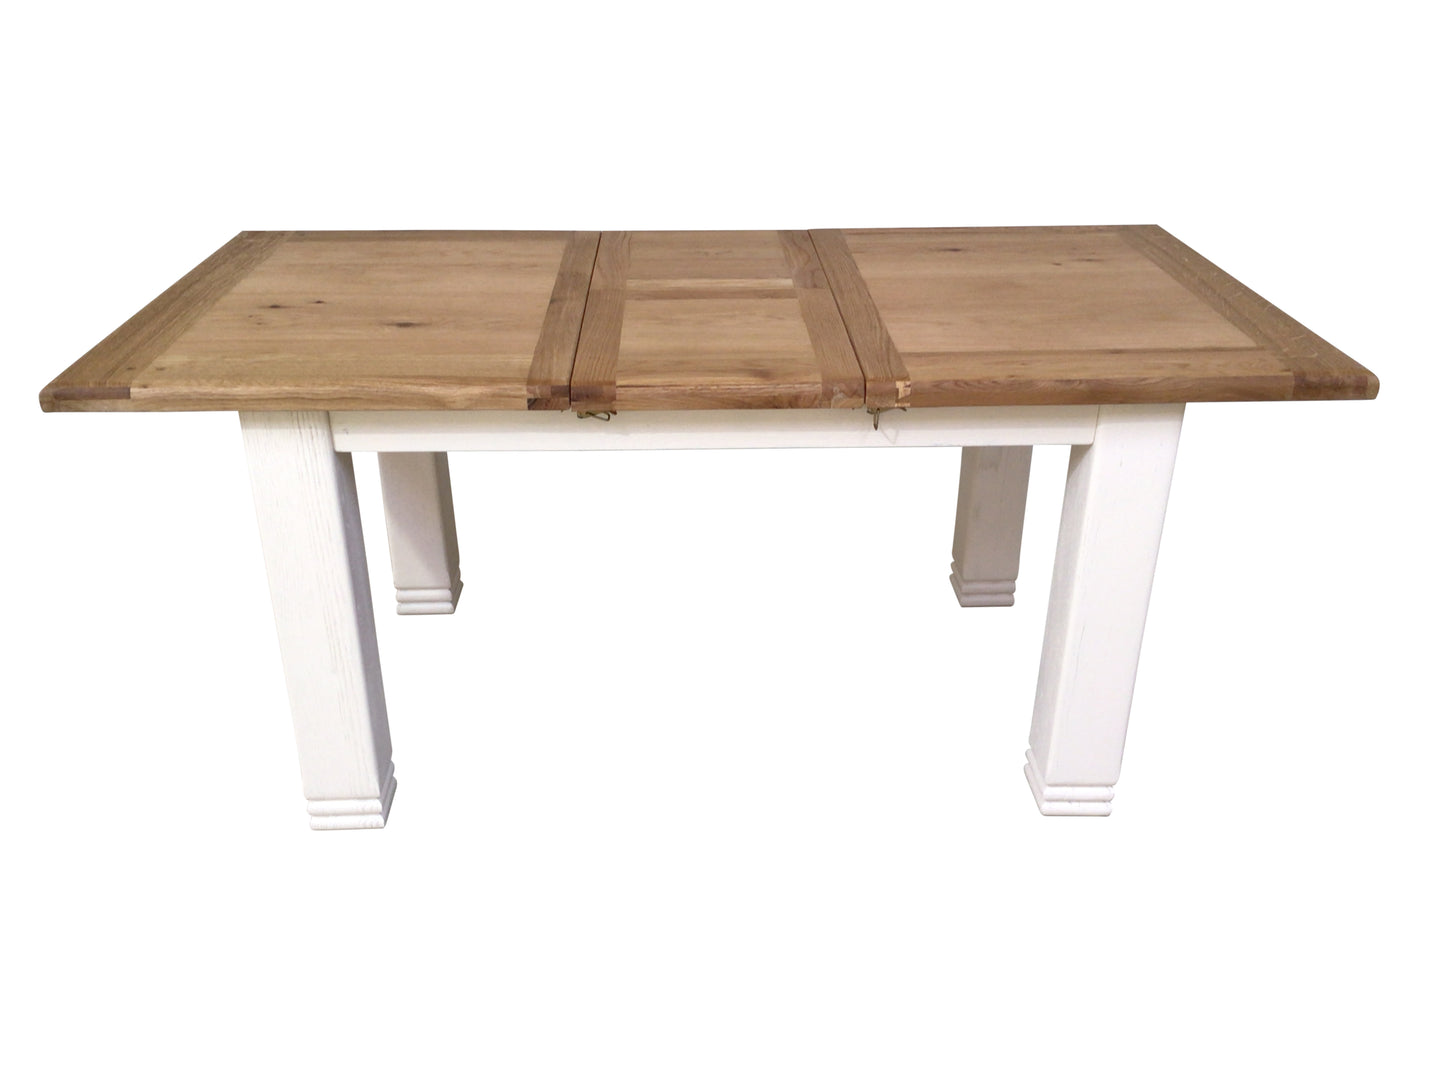 Danube Oak 1.4m Extension Dining Set painted Off-White